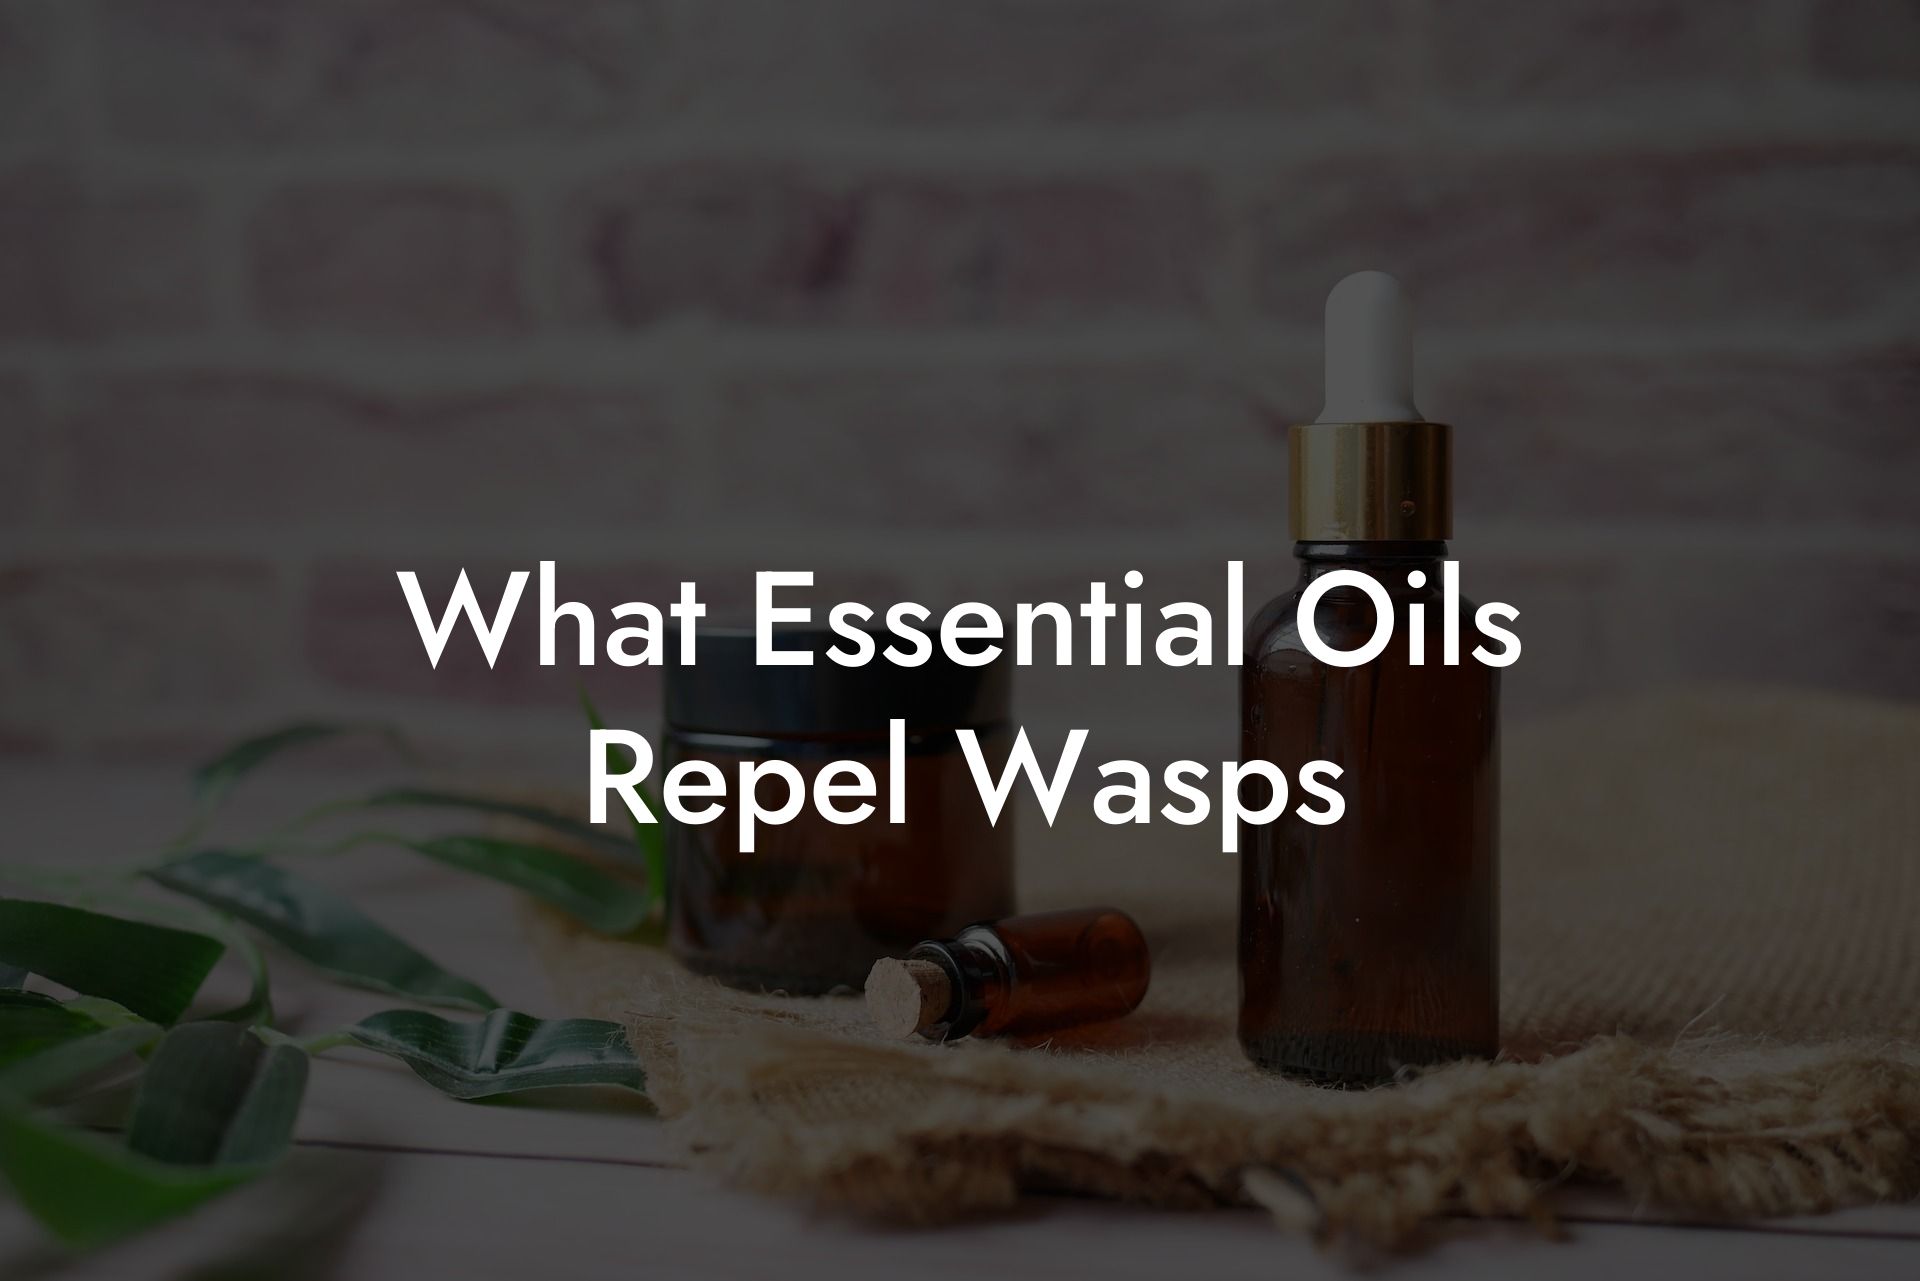 What Essential Oils Repel Wasps